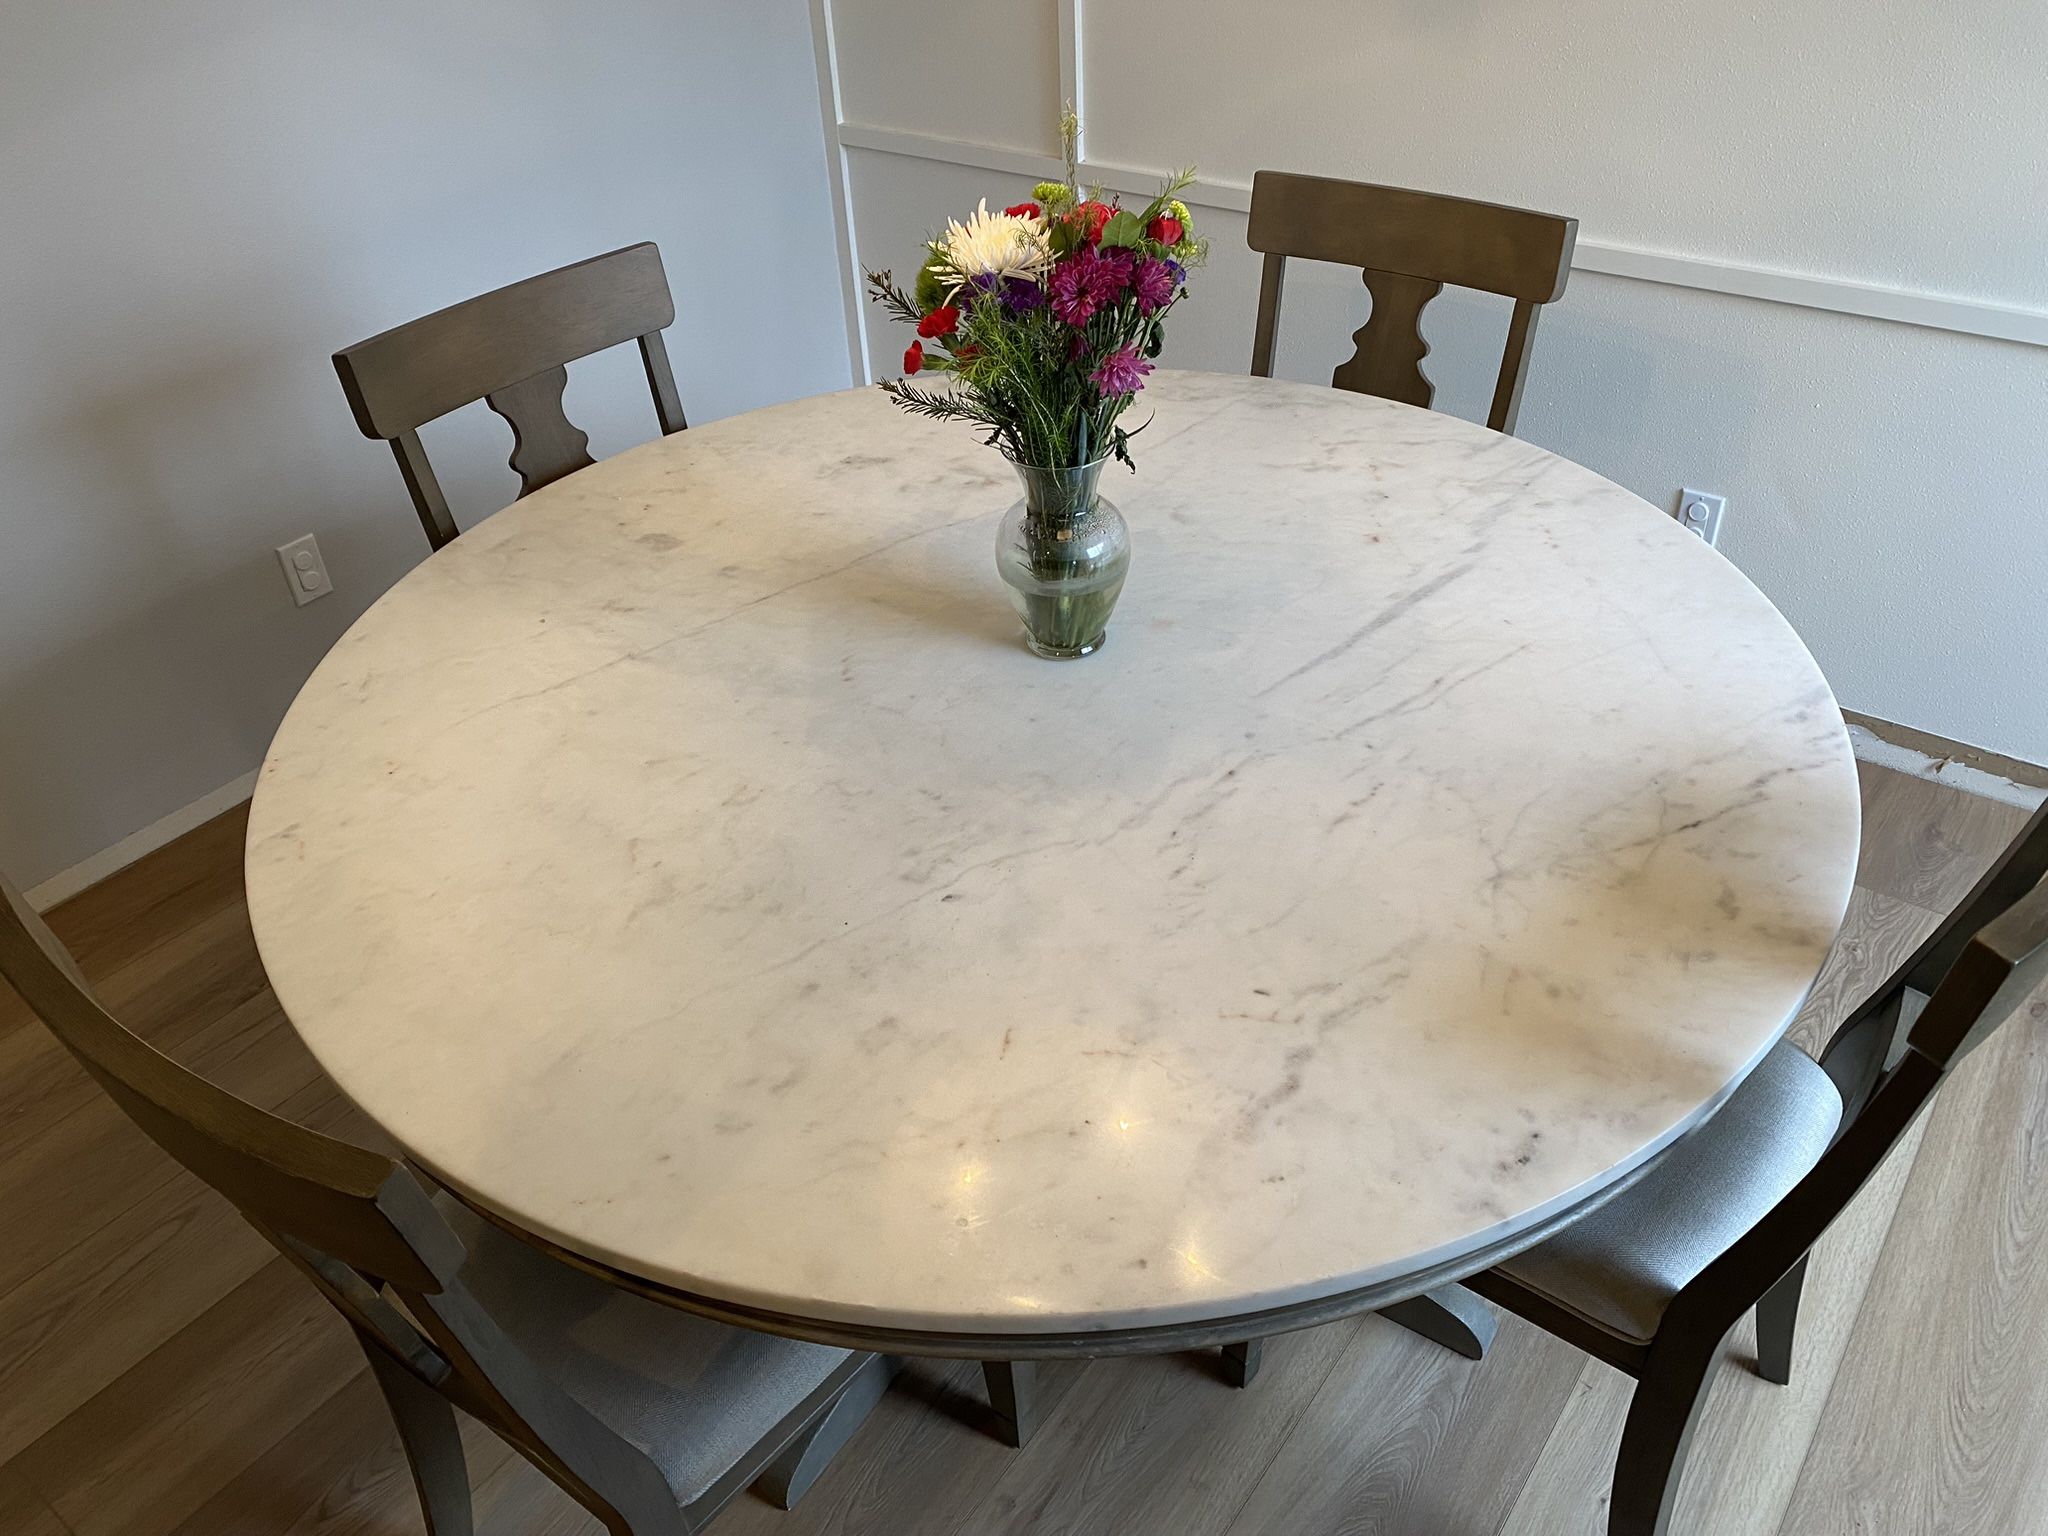 Pottery Barn Dining Room Table